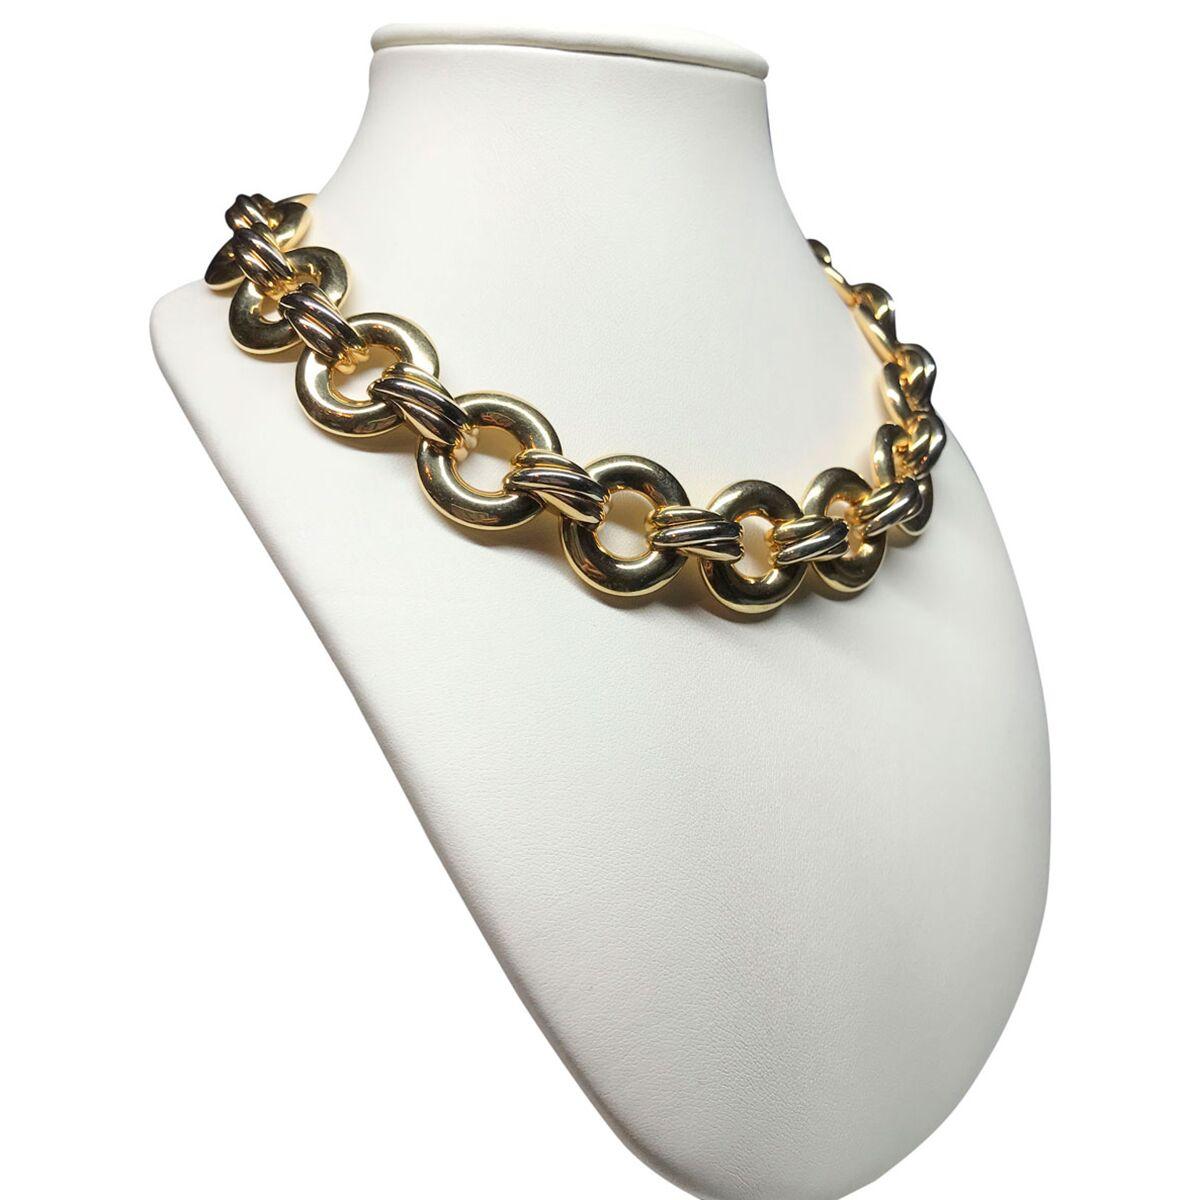 Cartier Trinity - this style epitomizes luxury and elegance and that's what this necklace is all about. Glorious 18k gold a very subtle 3 tone style. High polish yellow gold circles are connected with the trinity style 3 tone link that sits